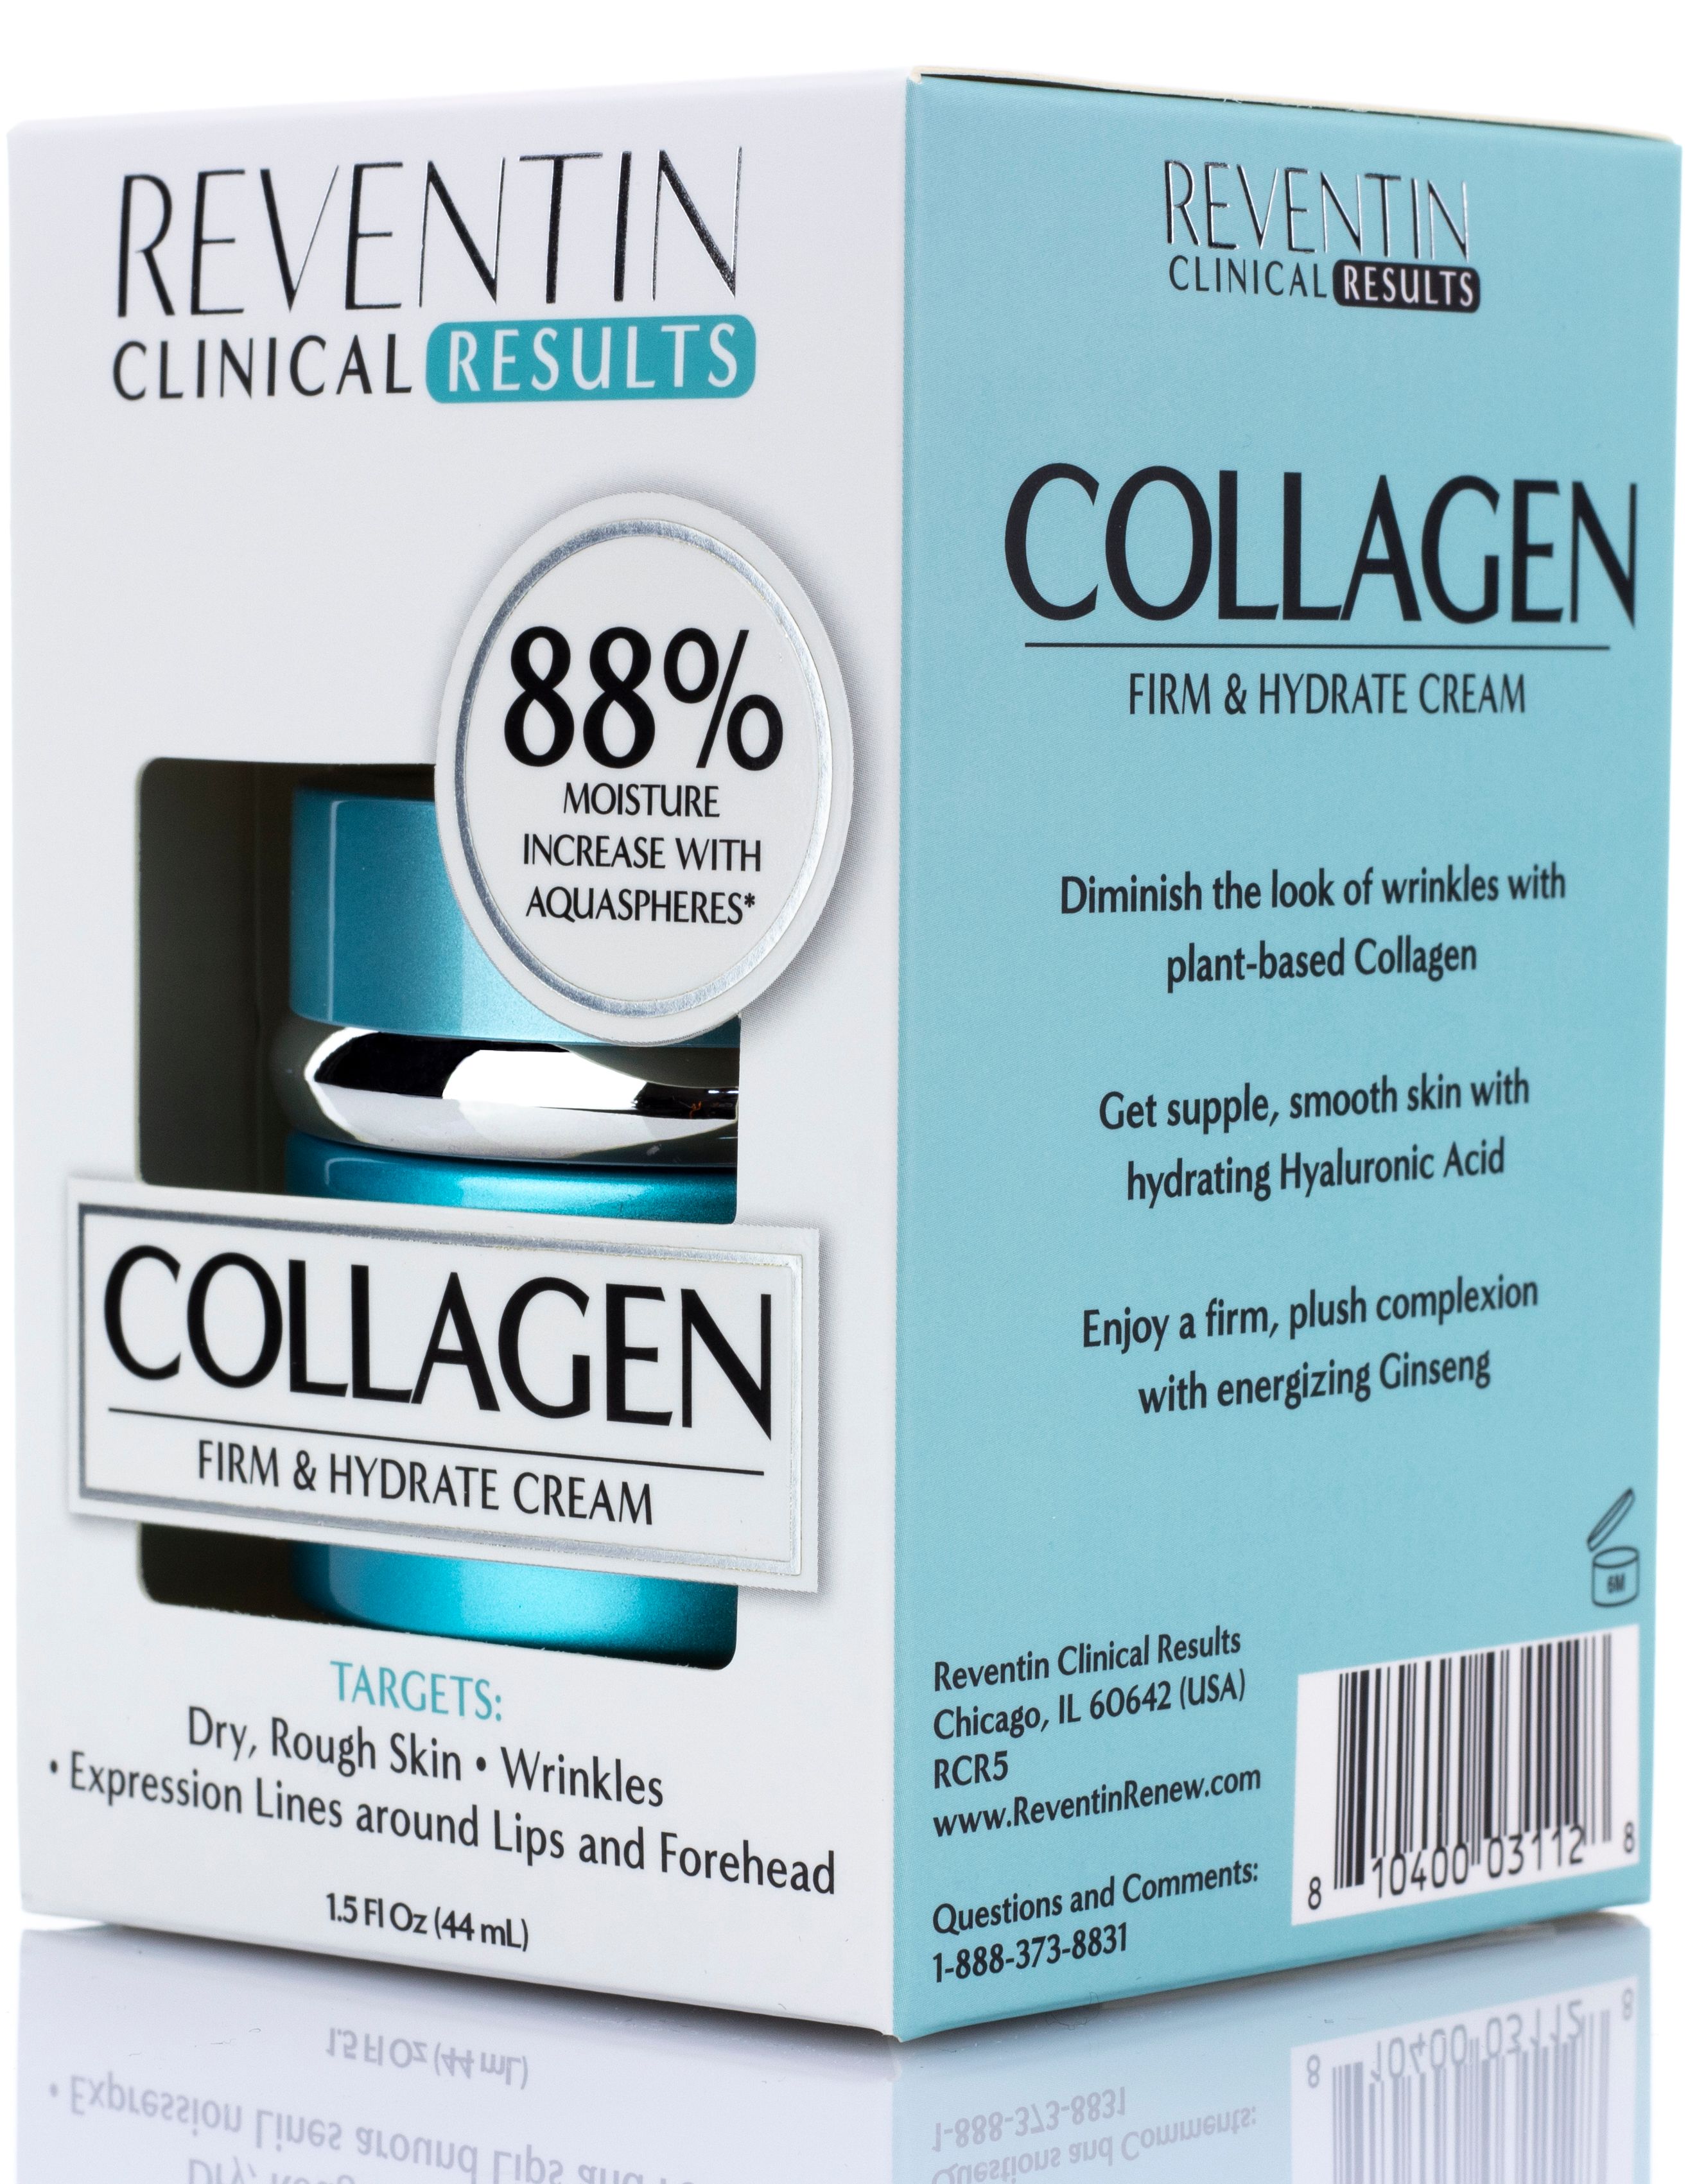 Reventin Clinical Results Collagen Cream Targets Wrinkles, Lines, and Texture. Firming Facial Moisturizer with Peptides. 1.5 fl oz - image 3 of 4